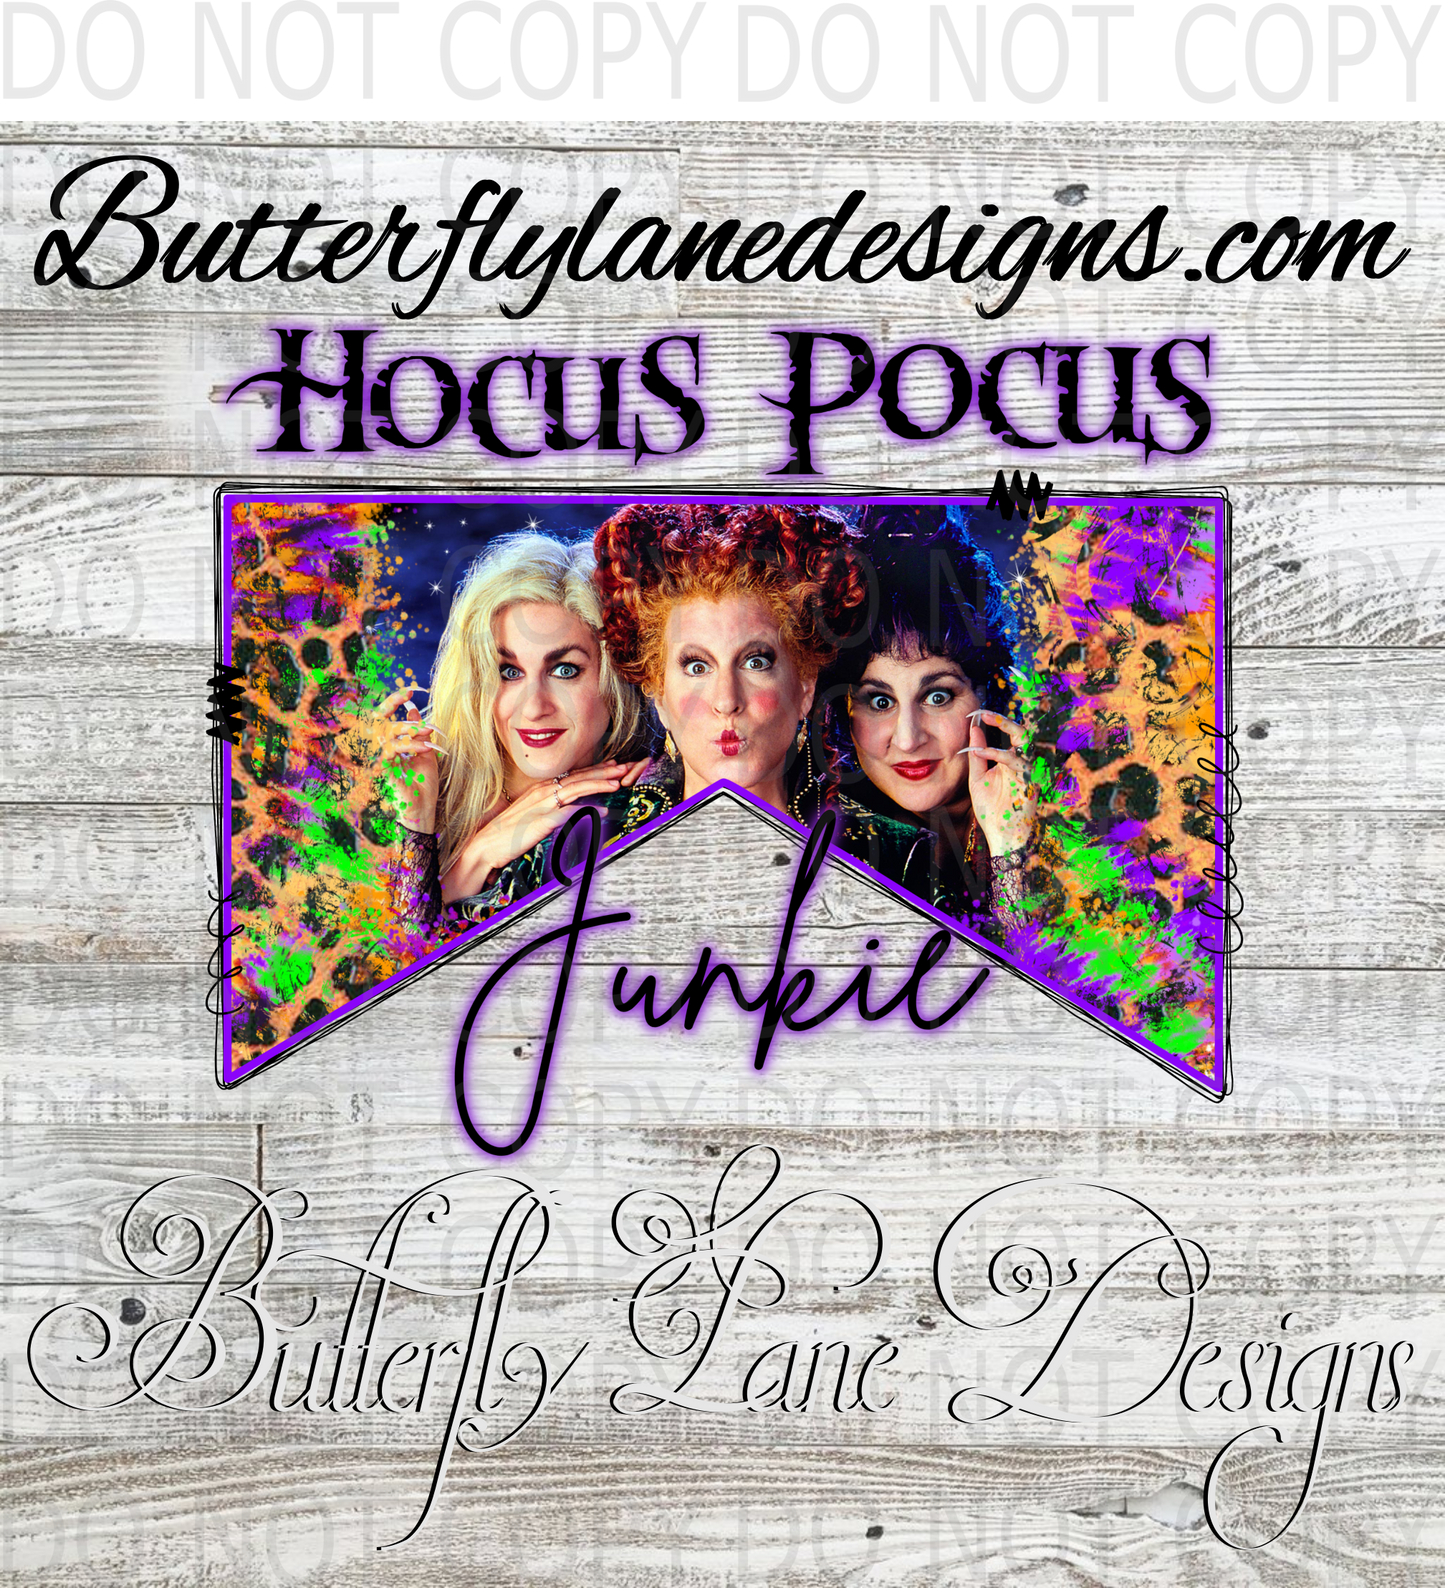 Hocus Pocus Junkie :: Clear Decal :: VC Decal